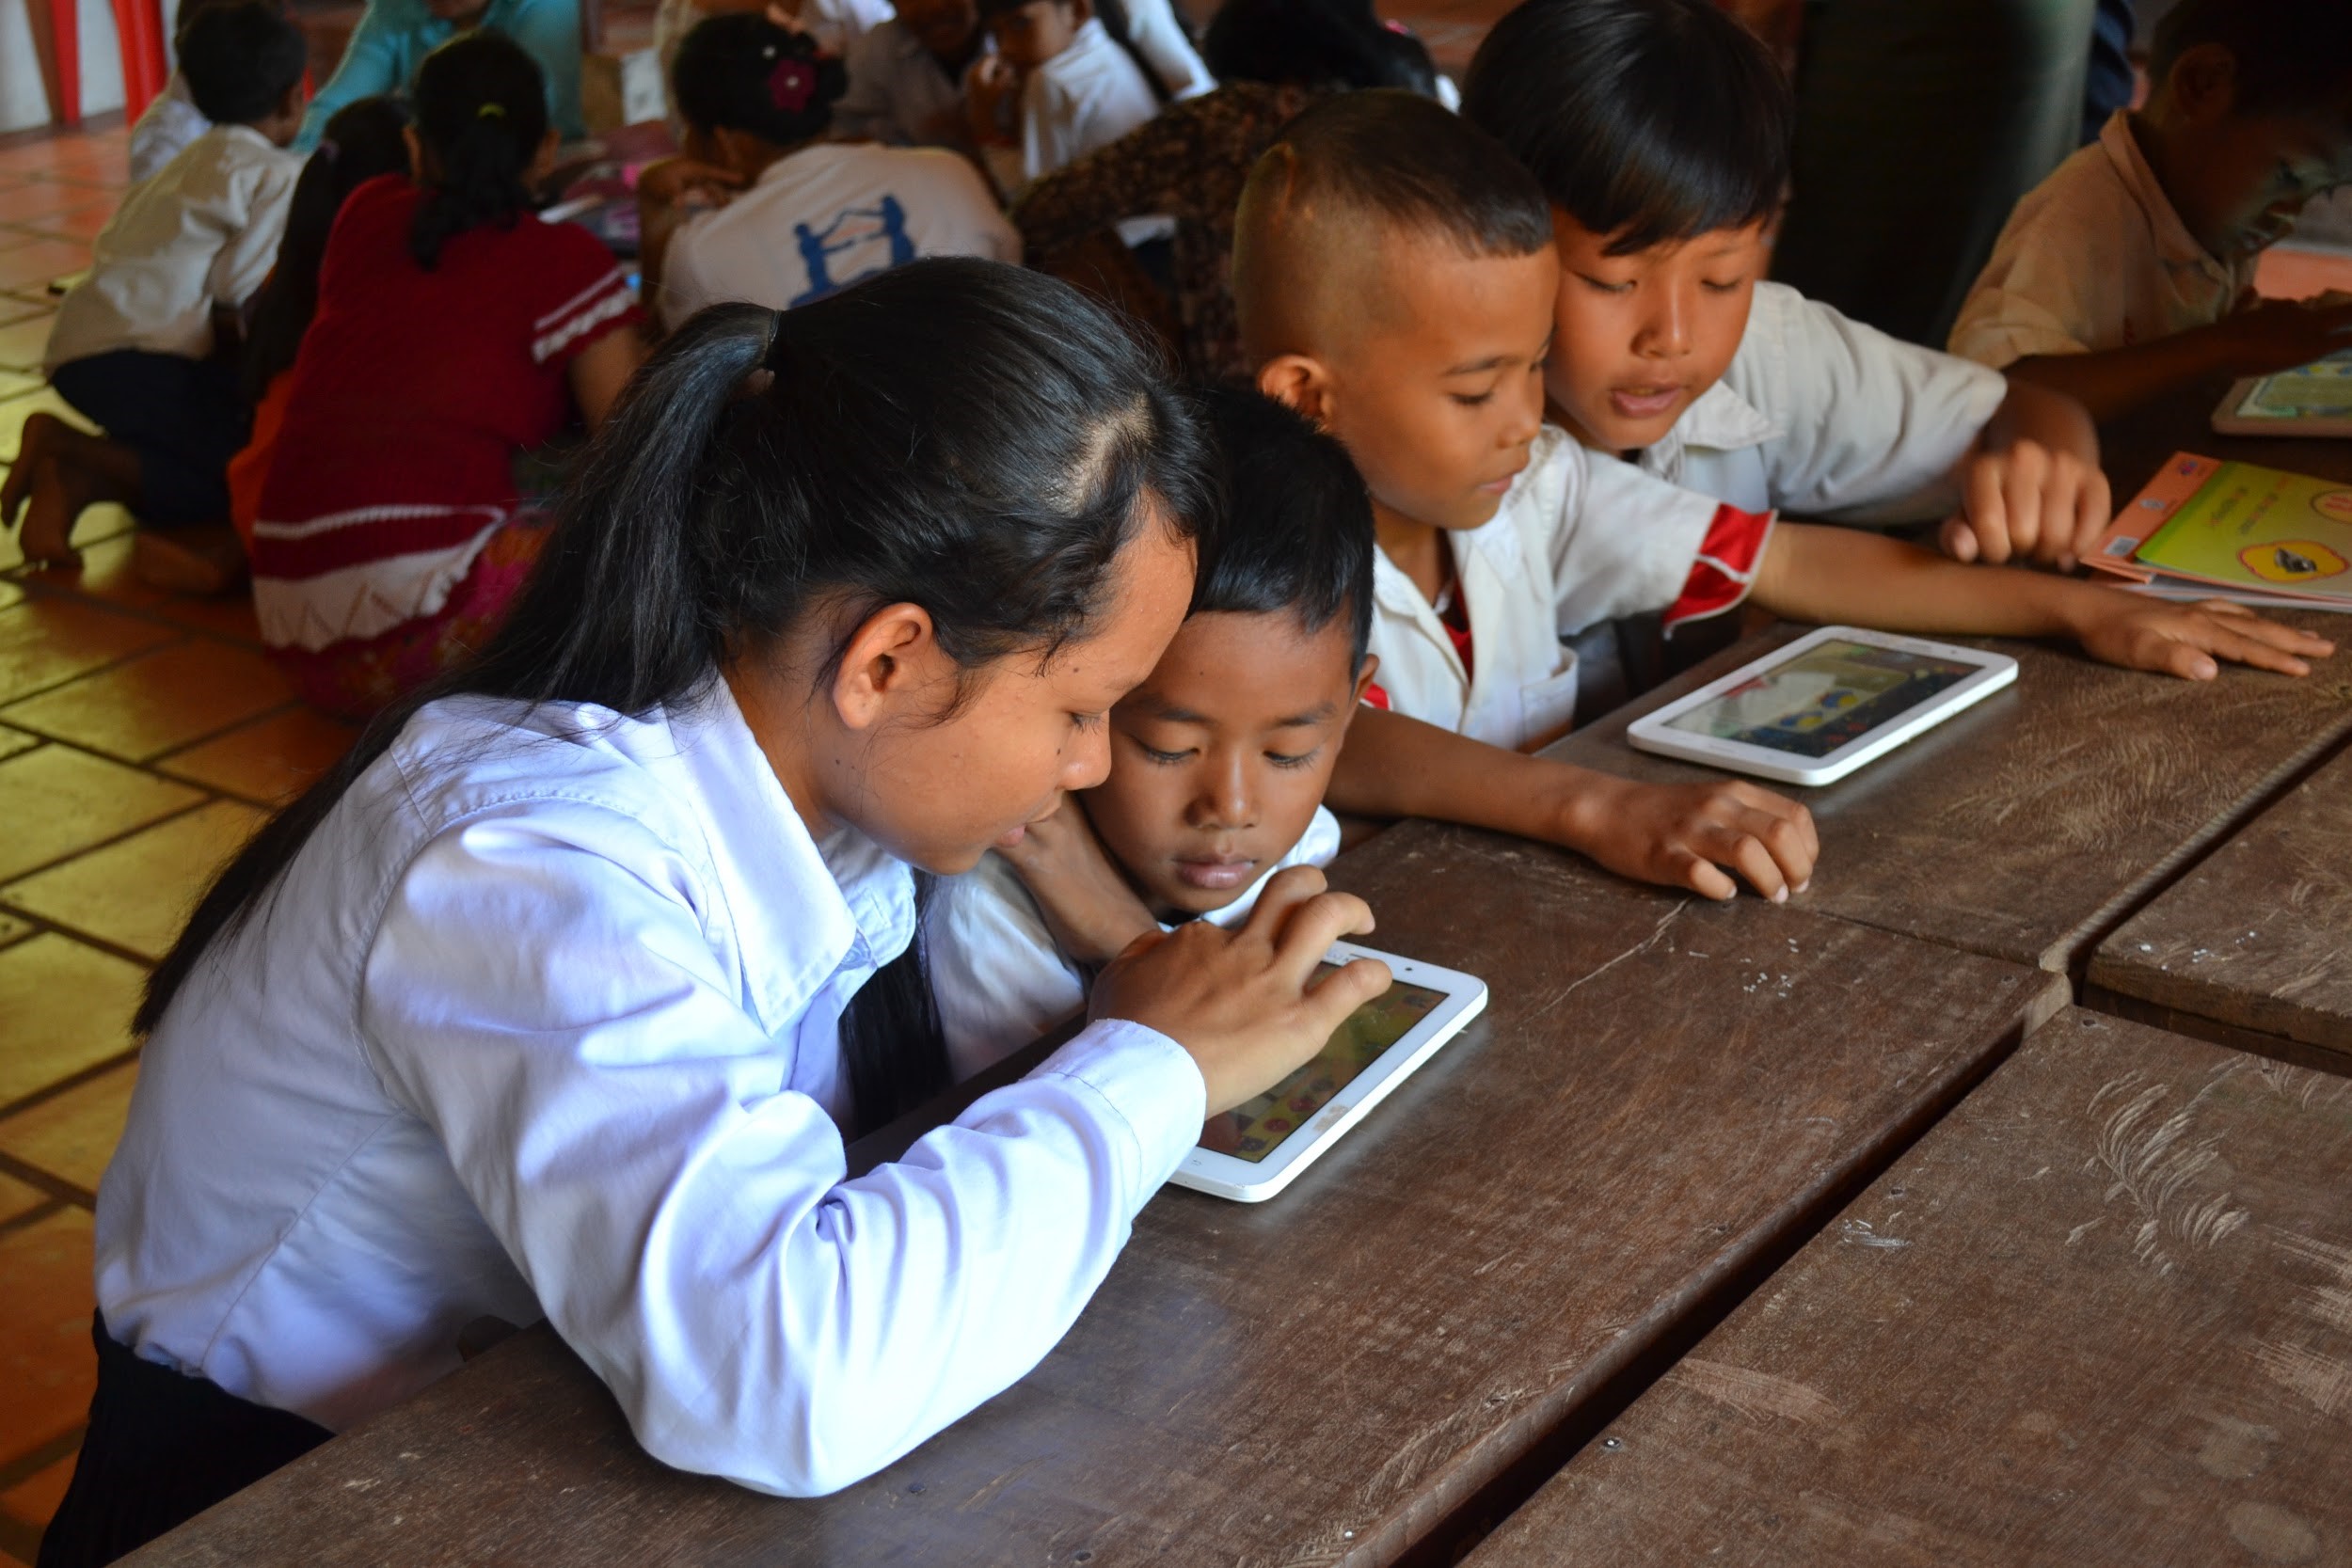 School children playing mobile app game together